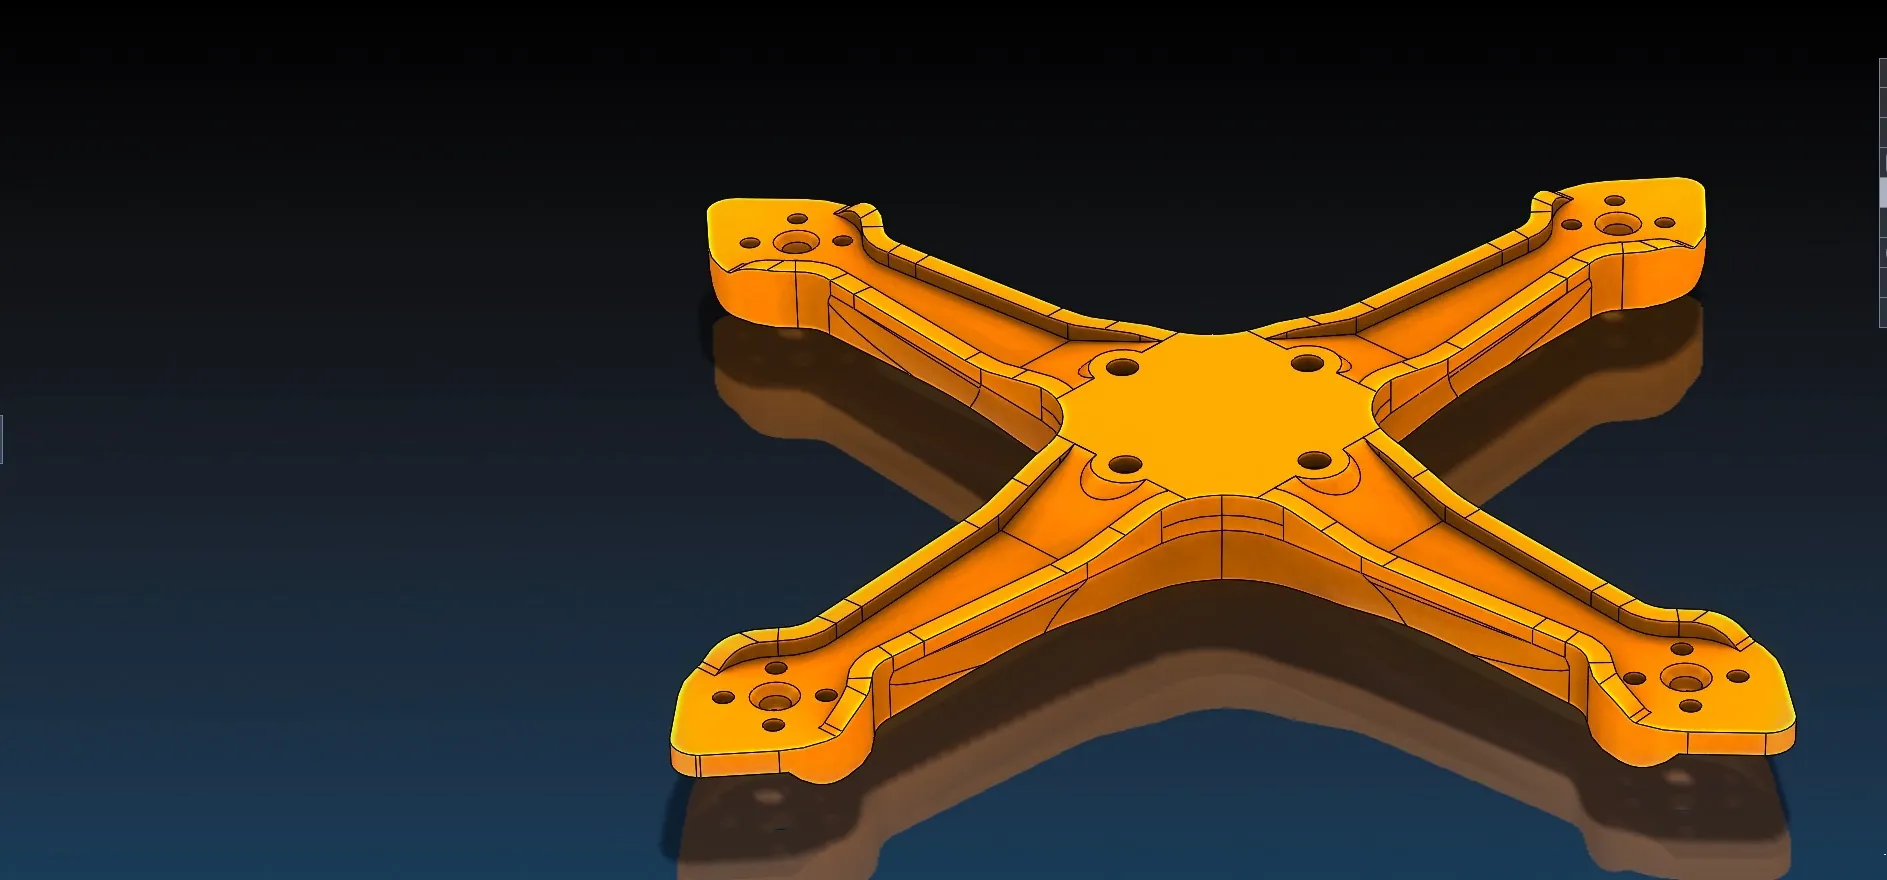 Engineering and Design 3D Printed Drone